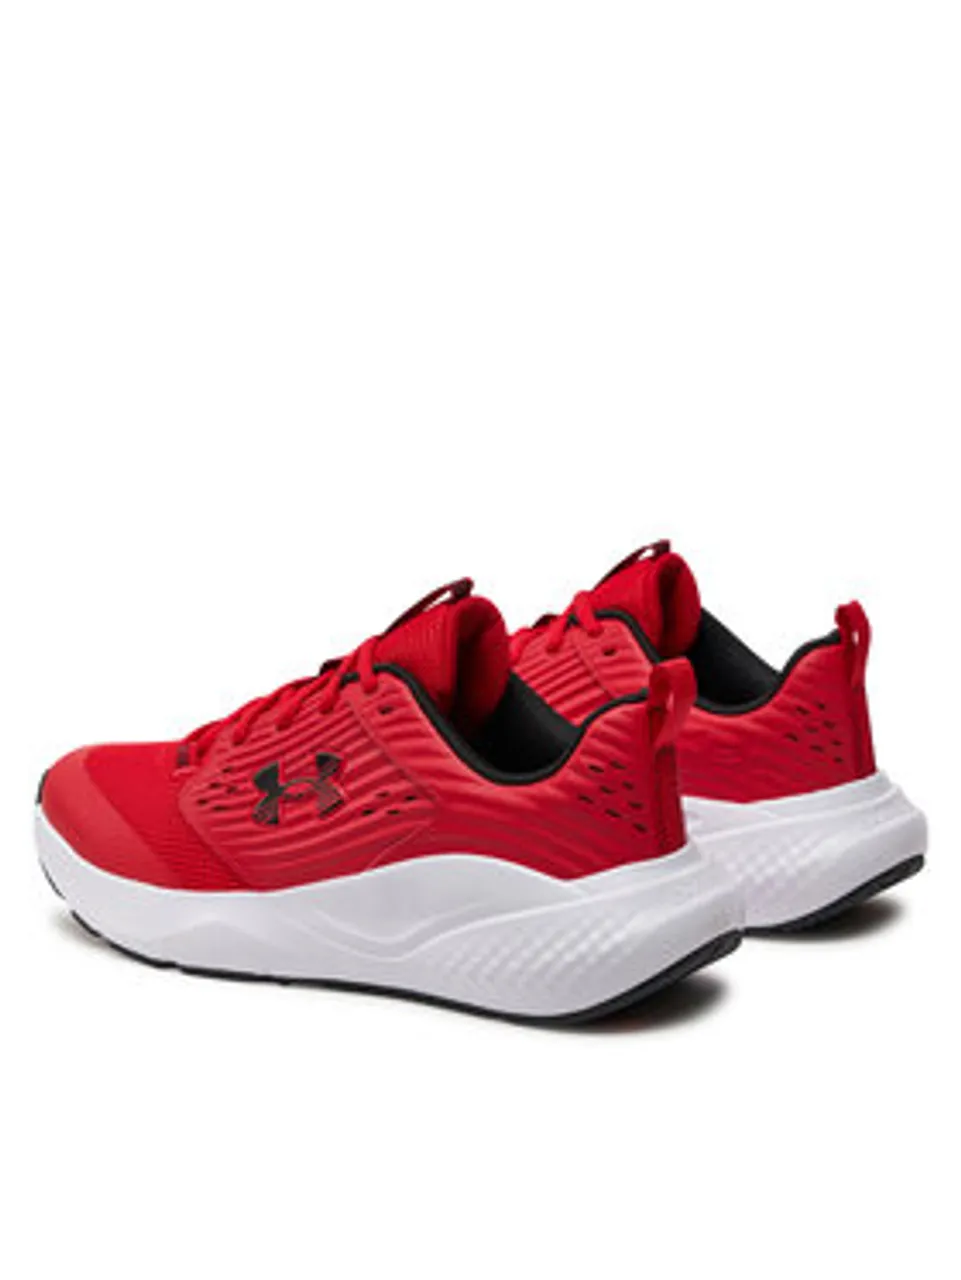 Under Armour Schuhe Ua Charged Commit Tr 4 3026017-601 Rot